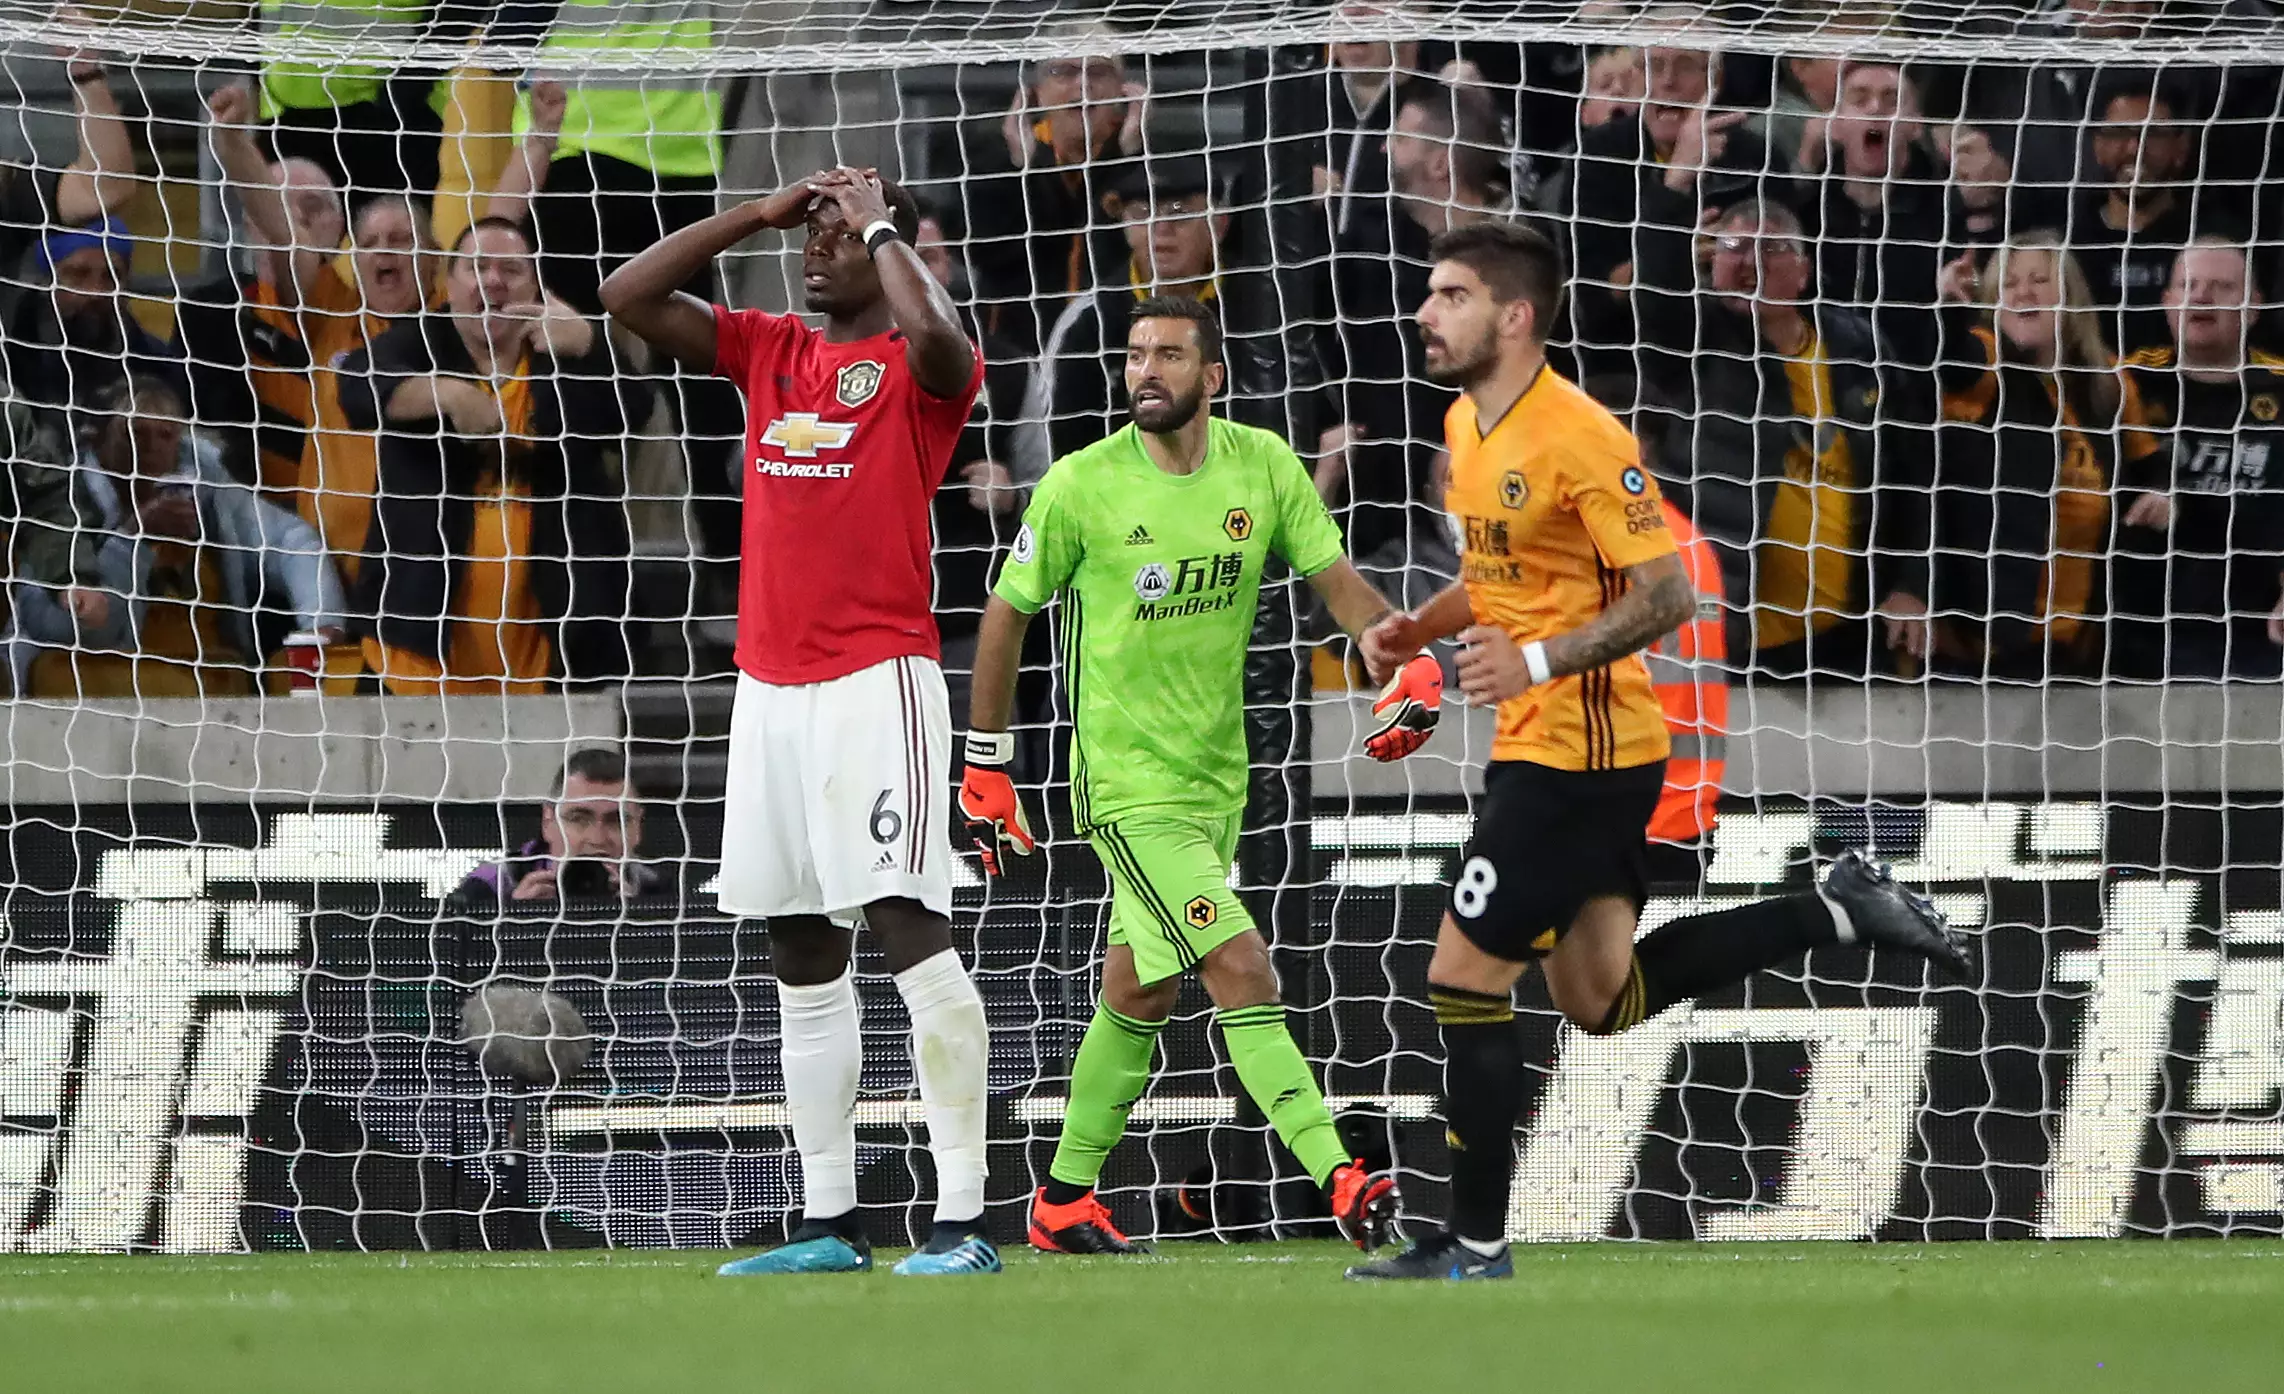 Pogba's penalty miss cost United two points against Wolves. Image: PA Images